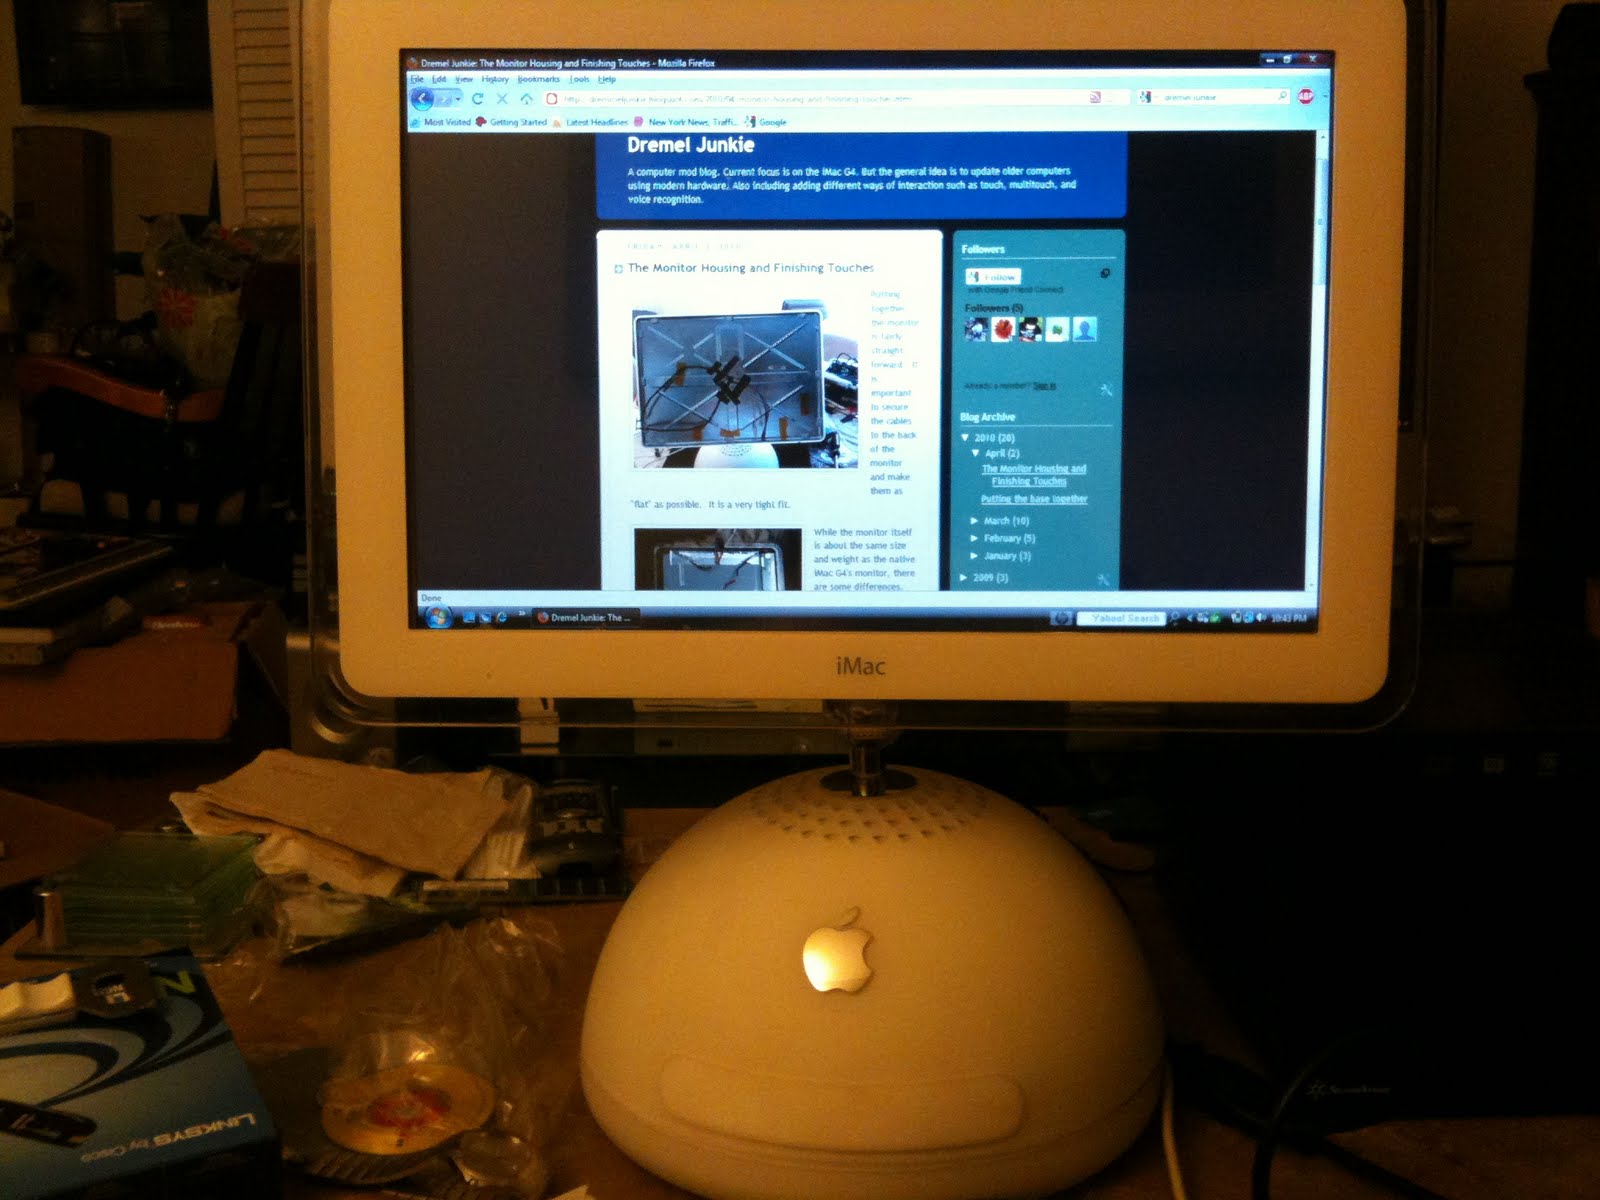 iMac “Lamp” G4 is modified with touchscreen and Windows 7 with Mac OS X look